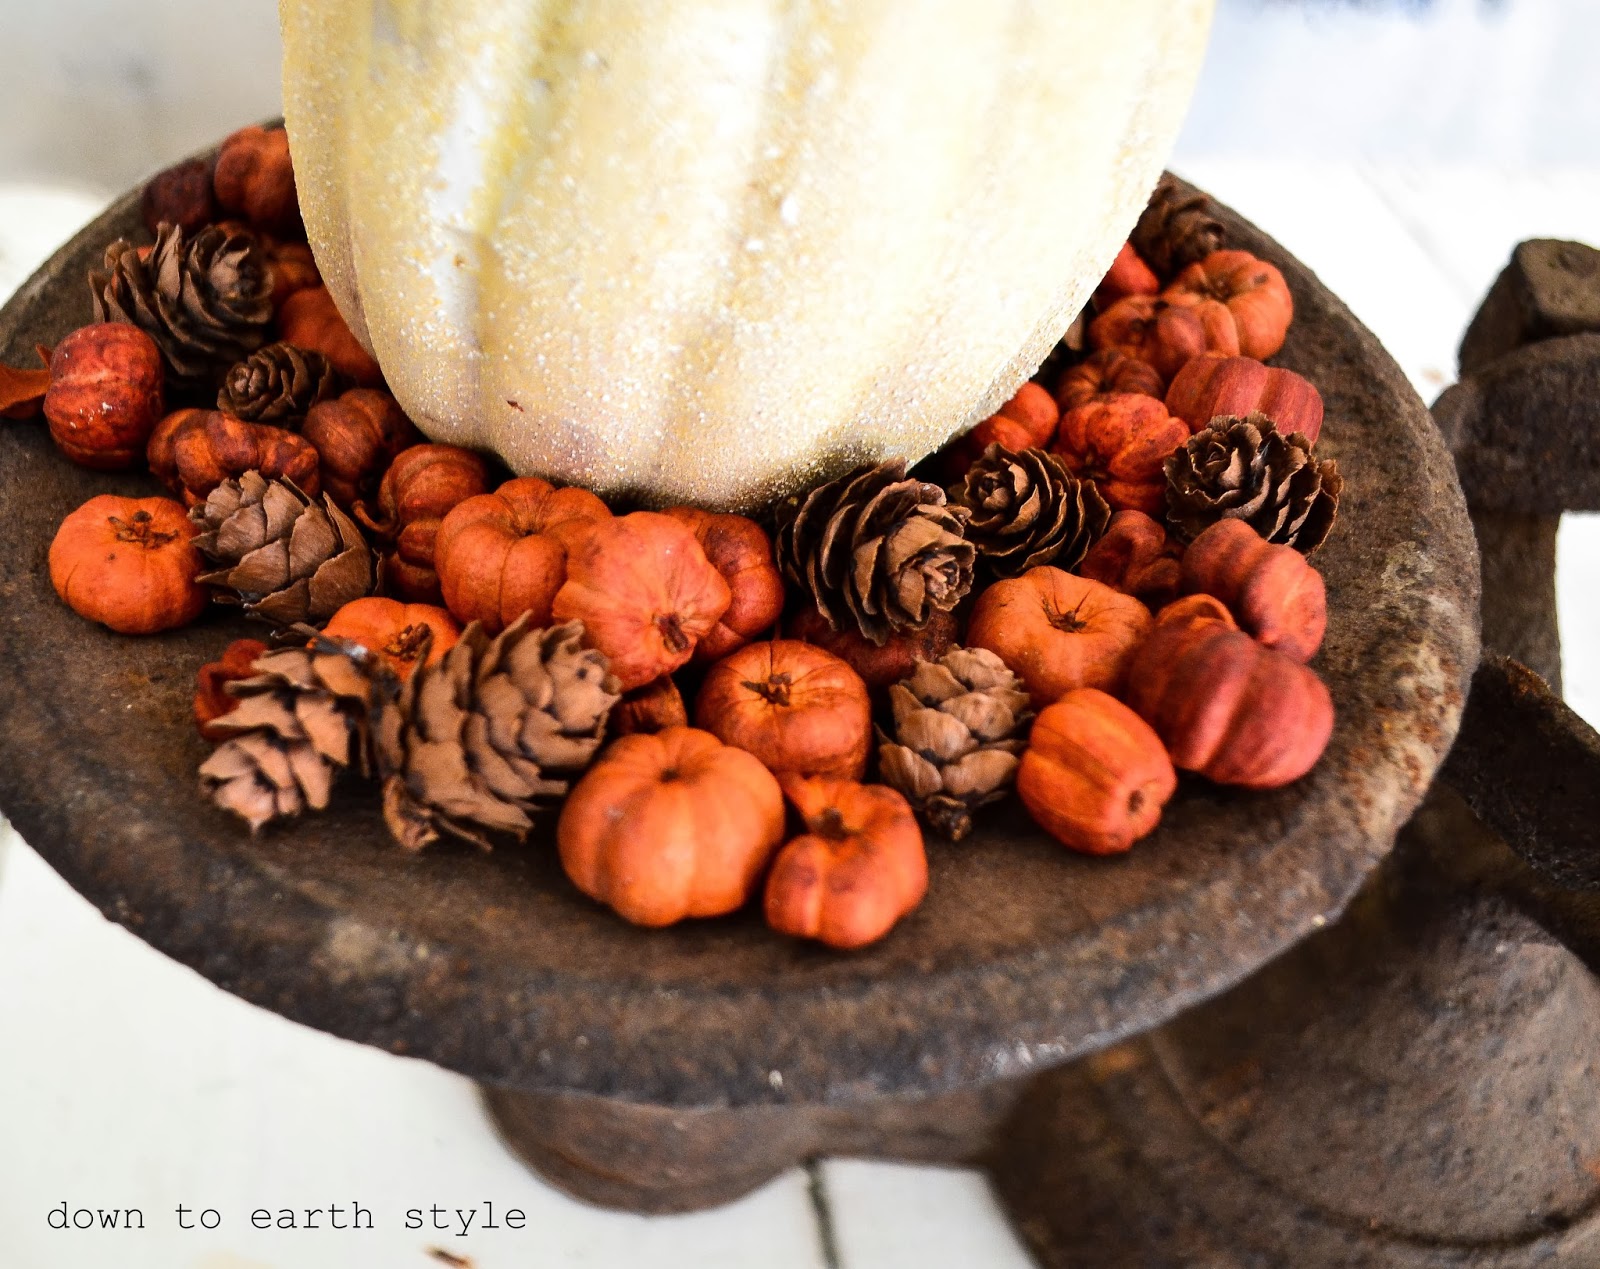 Down to Earth Style: Rusty Scale, Baby Pumpkins and Pinecones